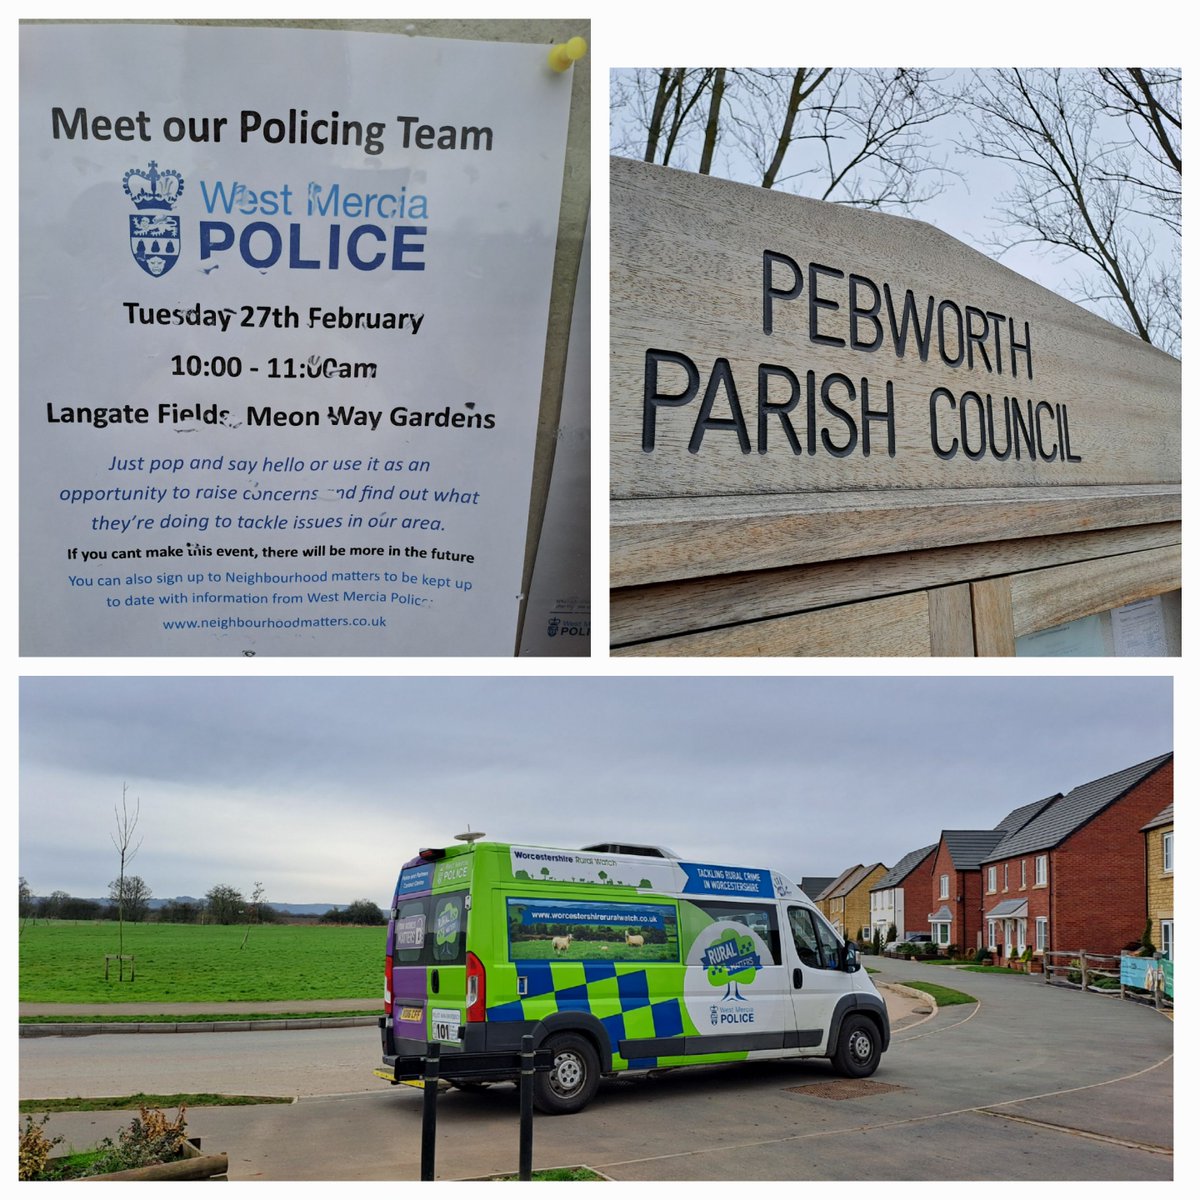 PC Prentice and PCSO SANSOM attended Meon Way Gardens, Long Marston this morning for an engagement session with its residents. Concerns raised by residents and reassurance given by the team on low crime statistics for the area. 🚔 #CommunityEngagement #ruralmatters #saferpeople